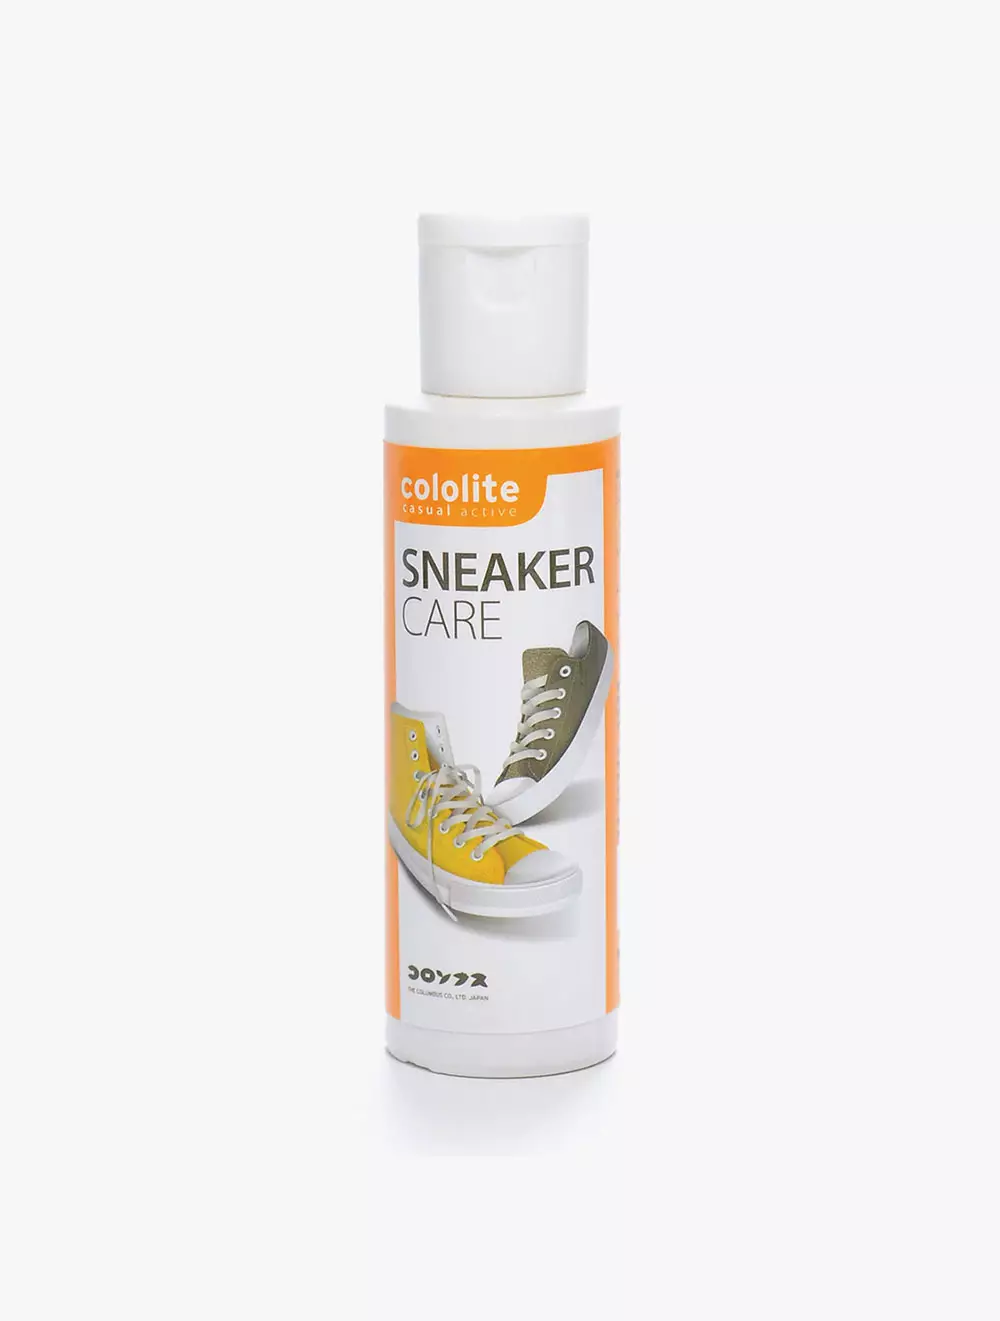 Payless Cololite Sneaker Care 75 ml - Neutral_17 - Natural